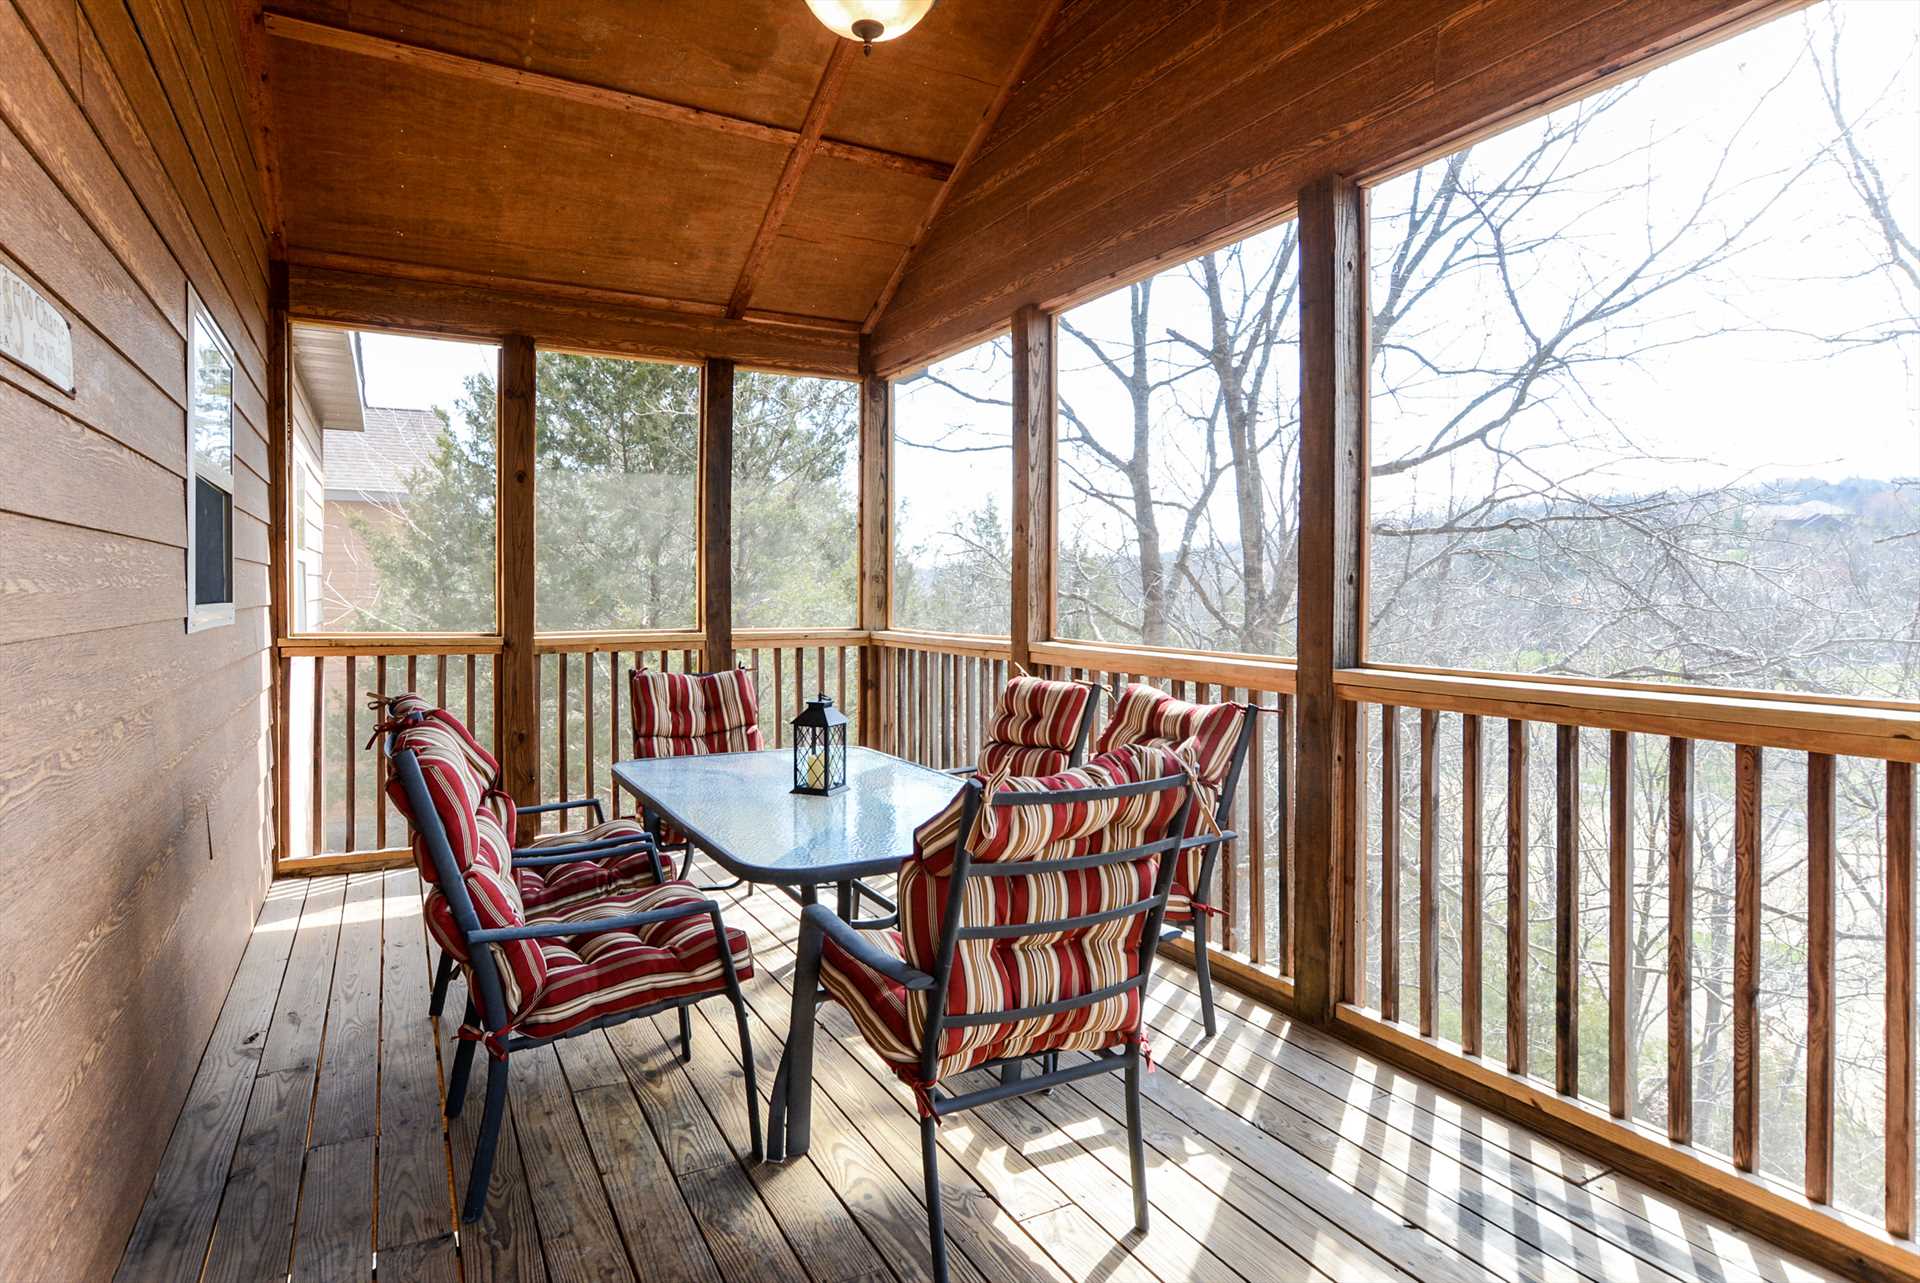 This open air deck is off of the lower level, Lodge #20.